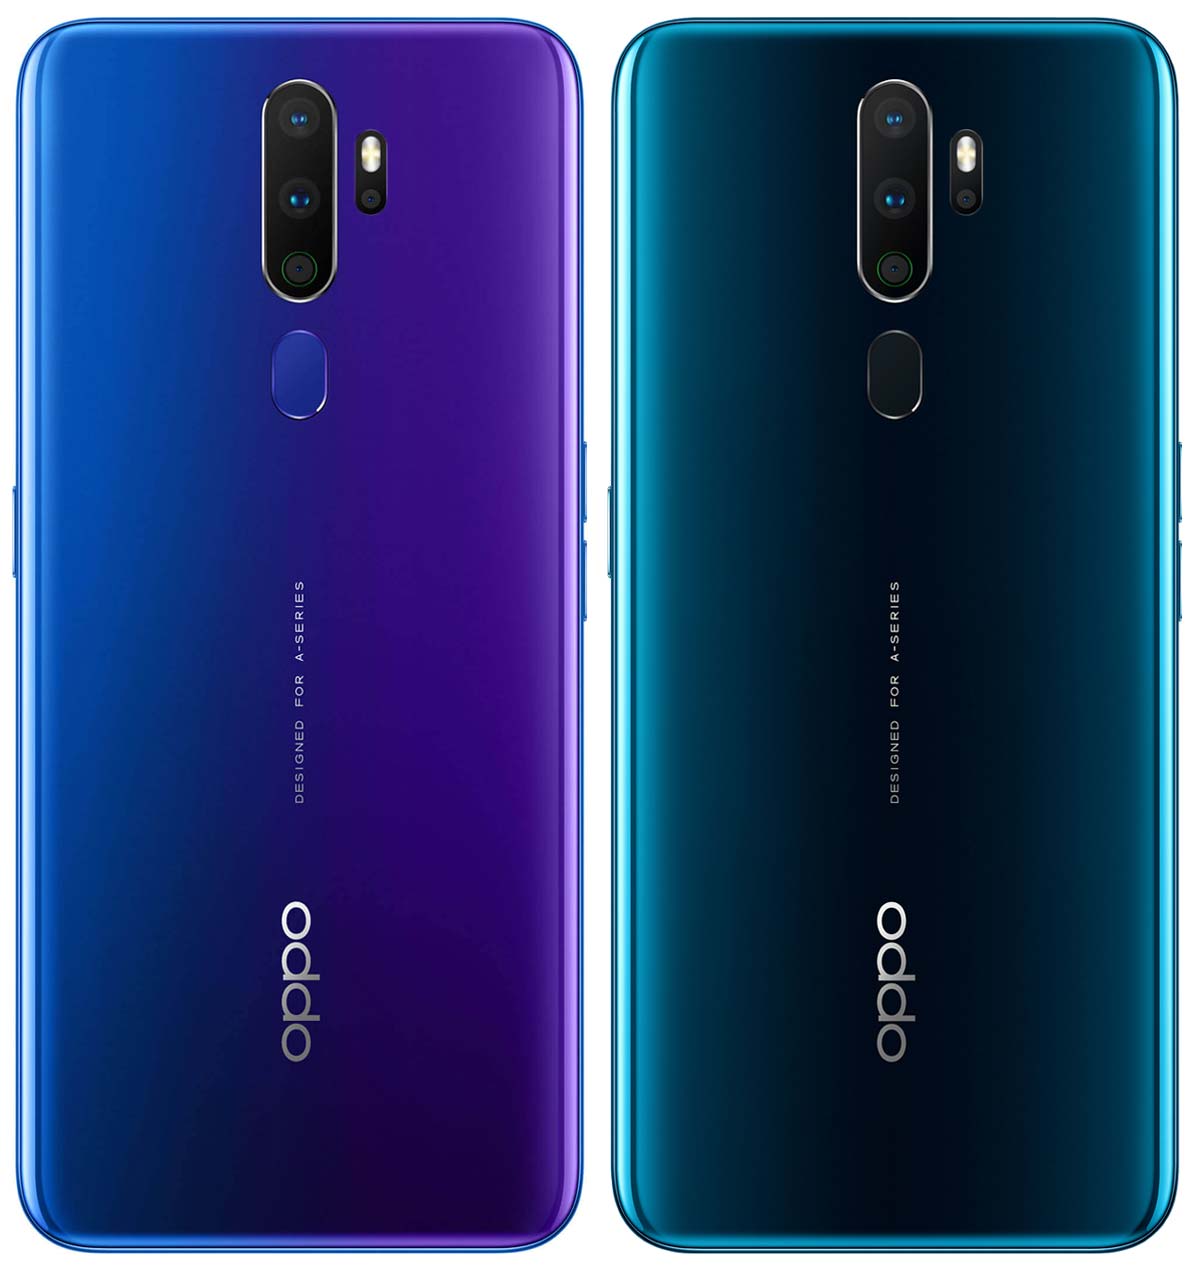 OPPO A9 2020 Launched at ₹16,990. [Update: Vanilla Mint Color Launched